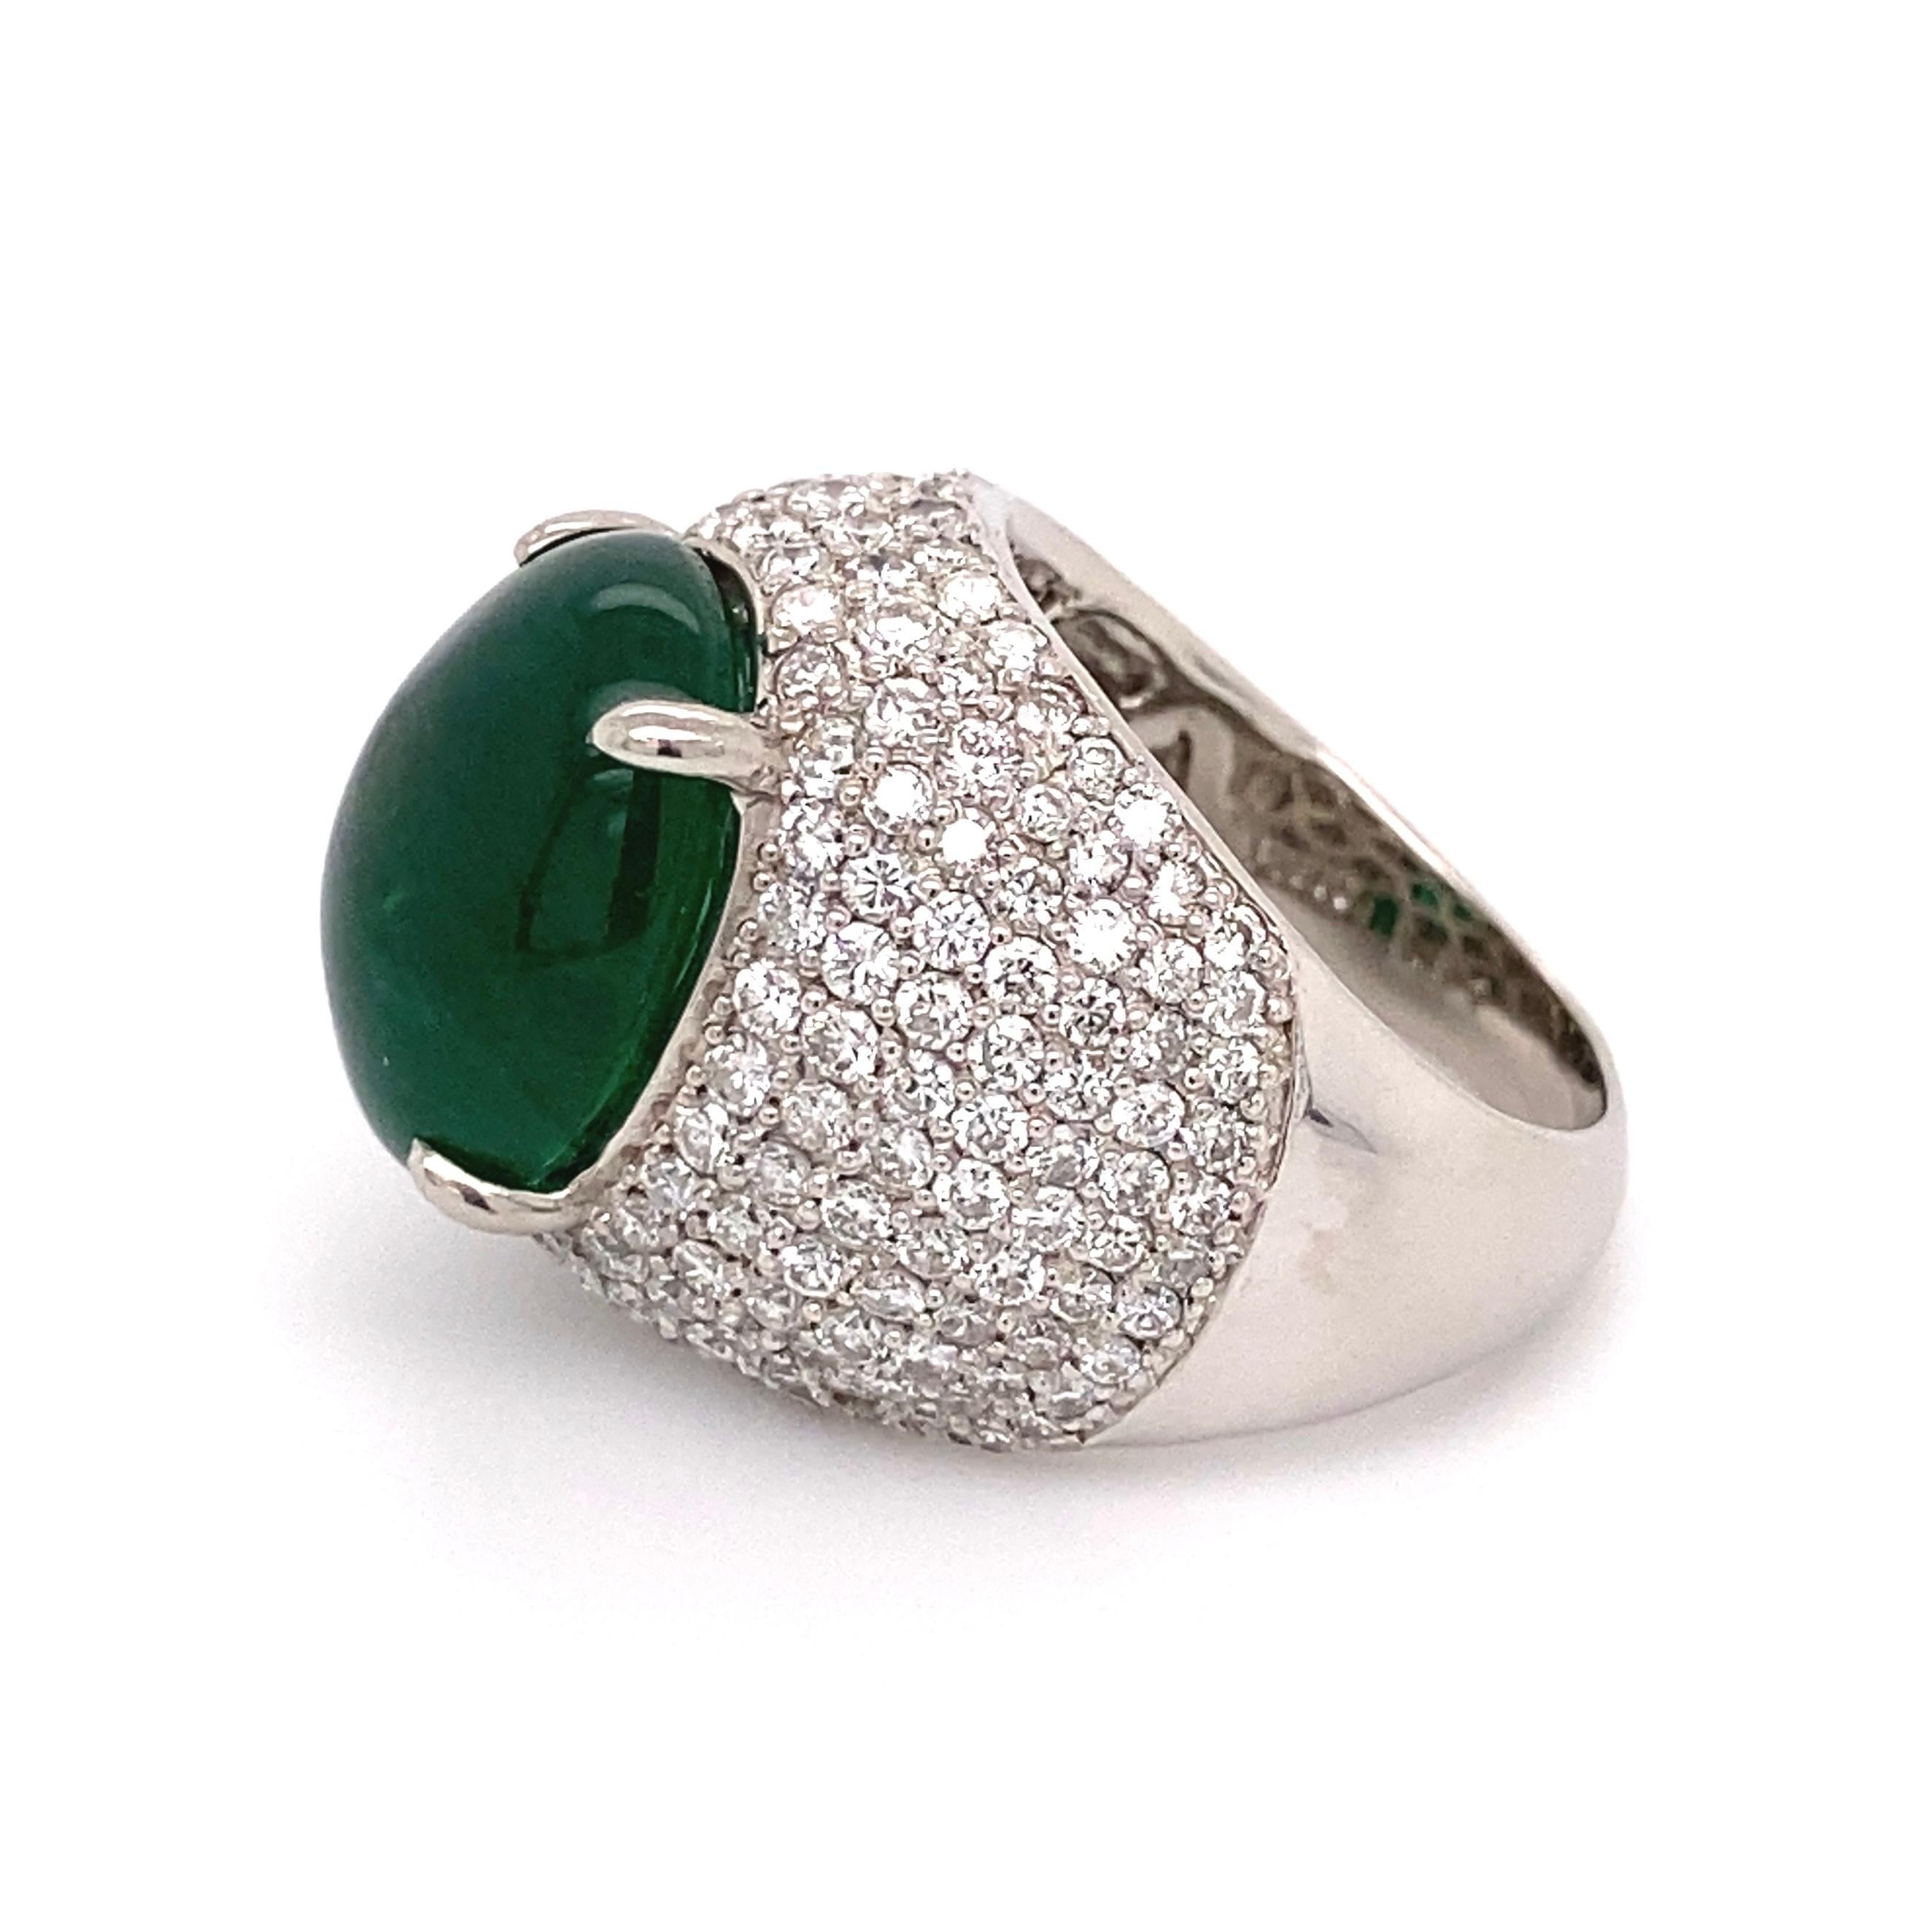 Mixed Cut 9.51 Carat Emerald GIA and Diamond Pave Platinum Dome Ring Estate Fine Jewelry For Sale